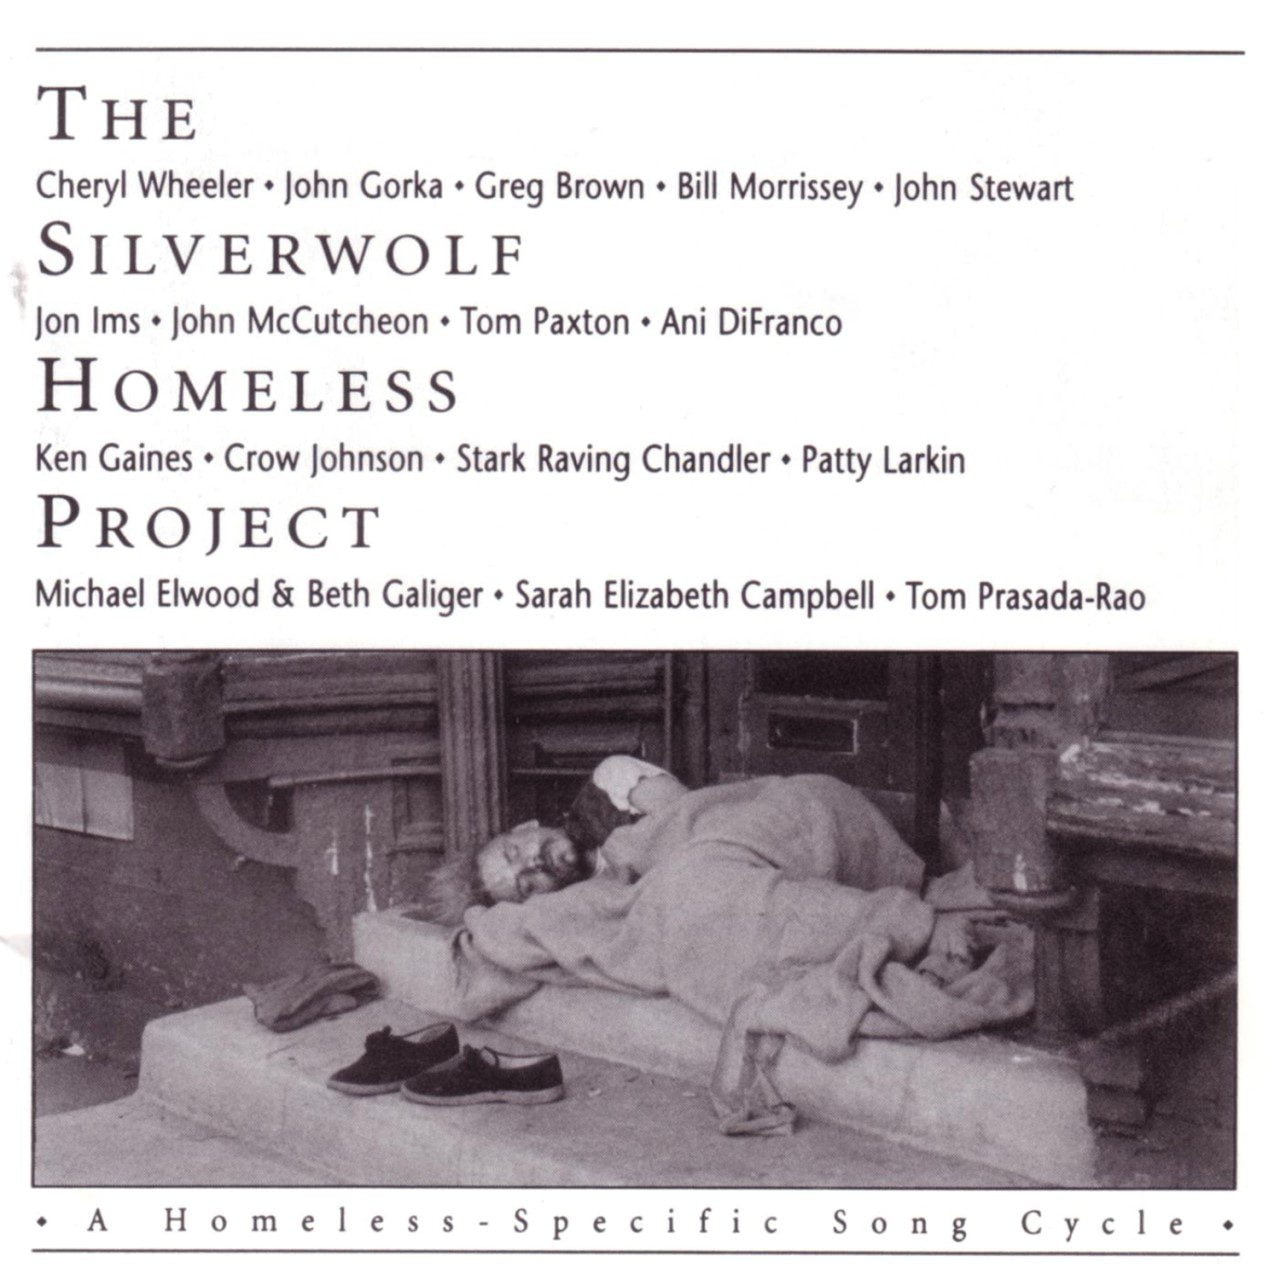 A.A.V.V. - The Silverwolf Homeless Project cover album